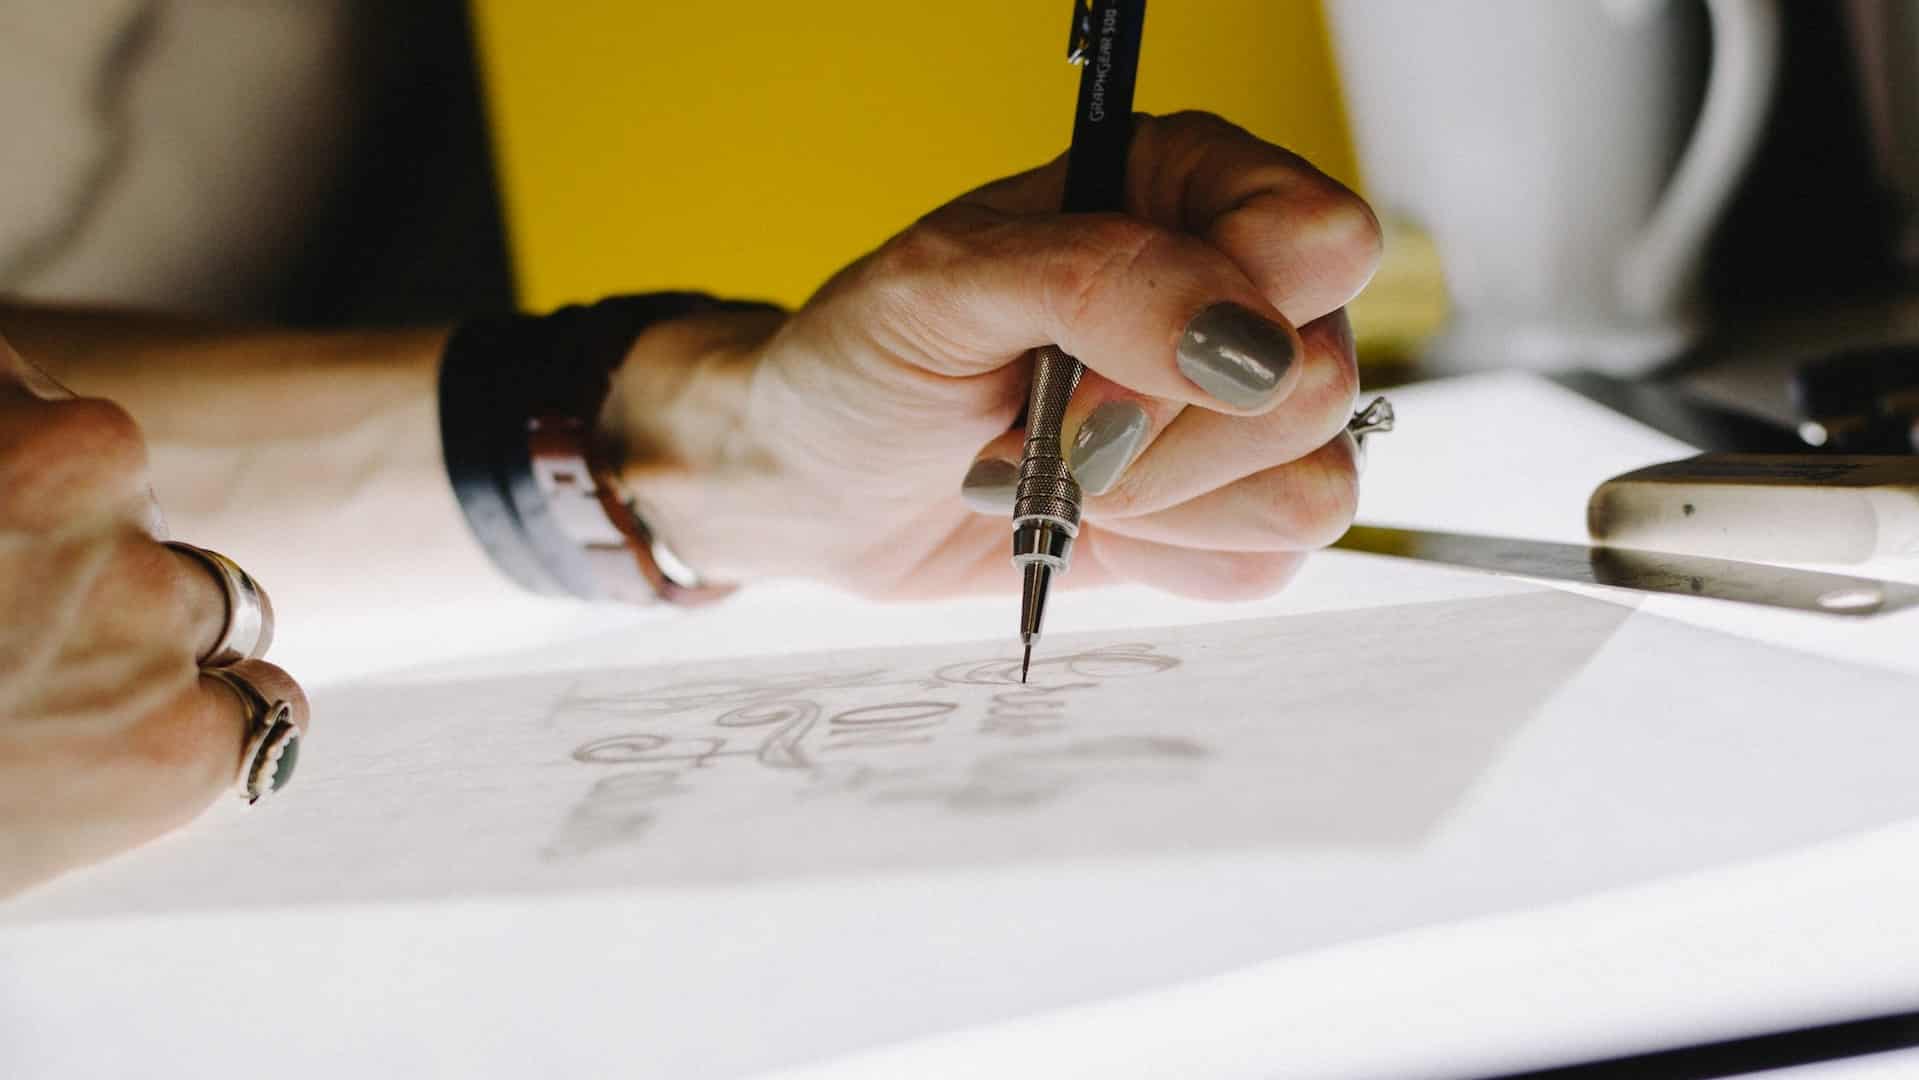 A person designing a company logo on a piece of paper.